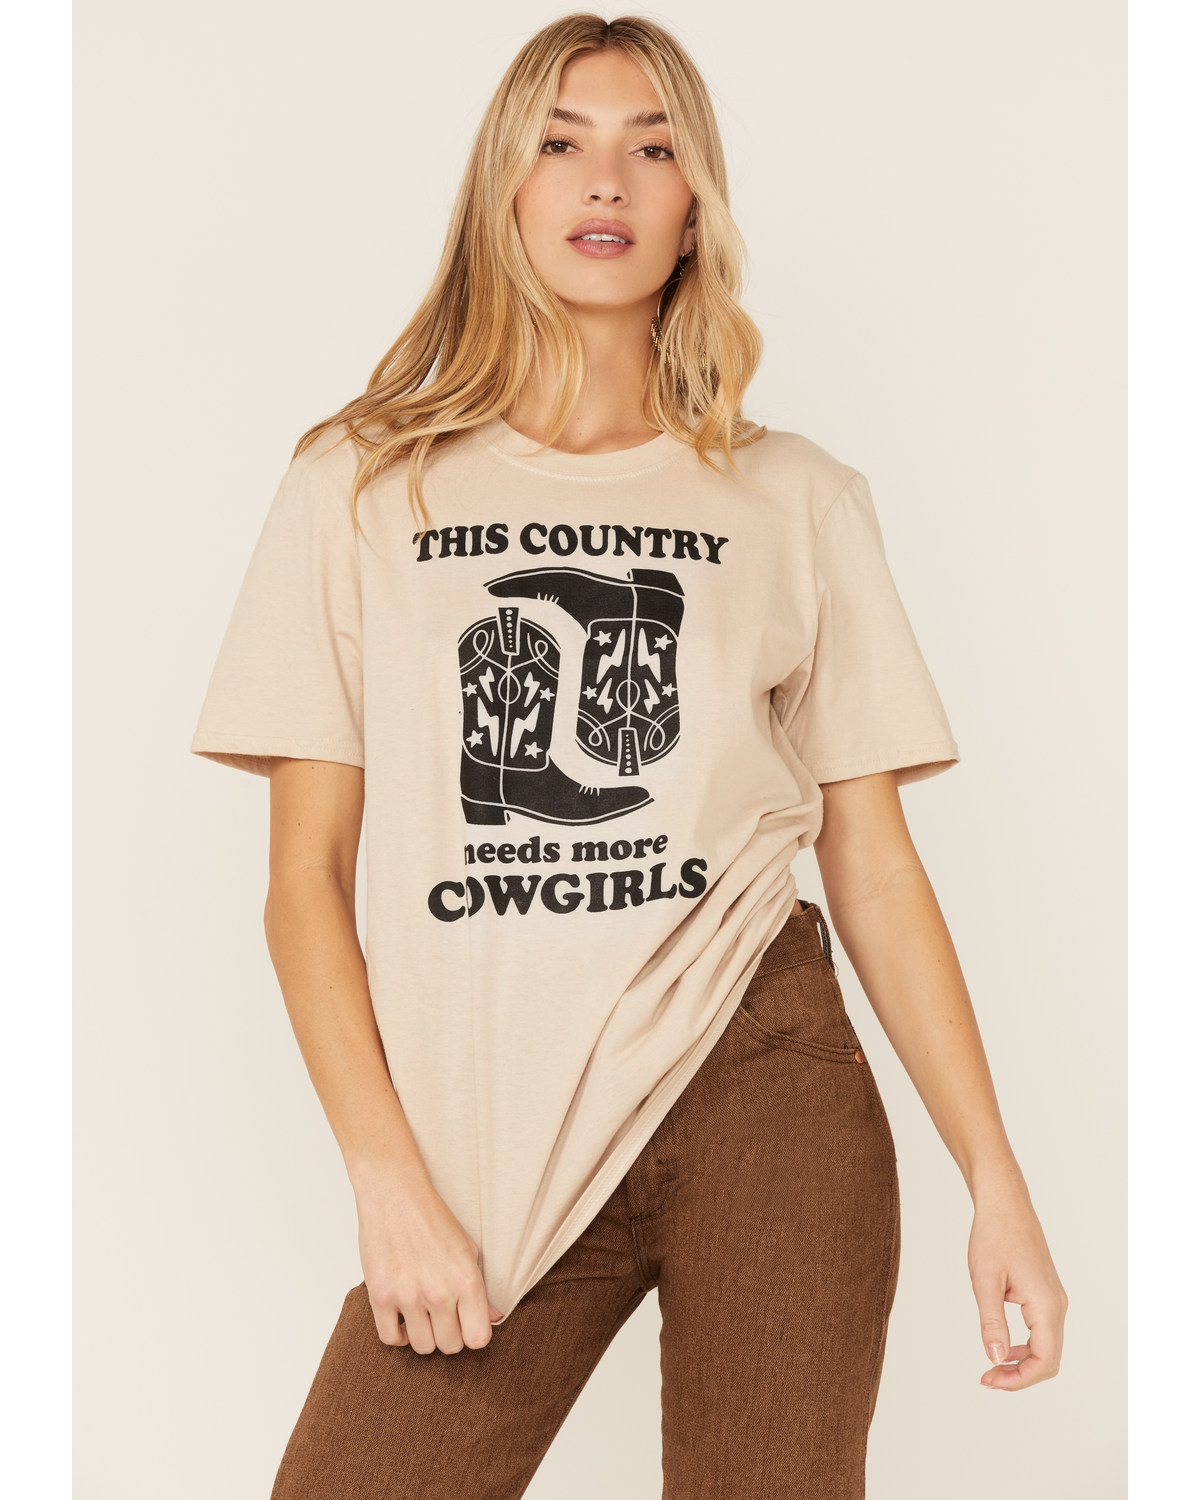 Ali Dee Women's Sand This Country Needs More Cowgirls Graphic Tee